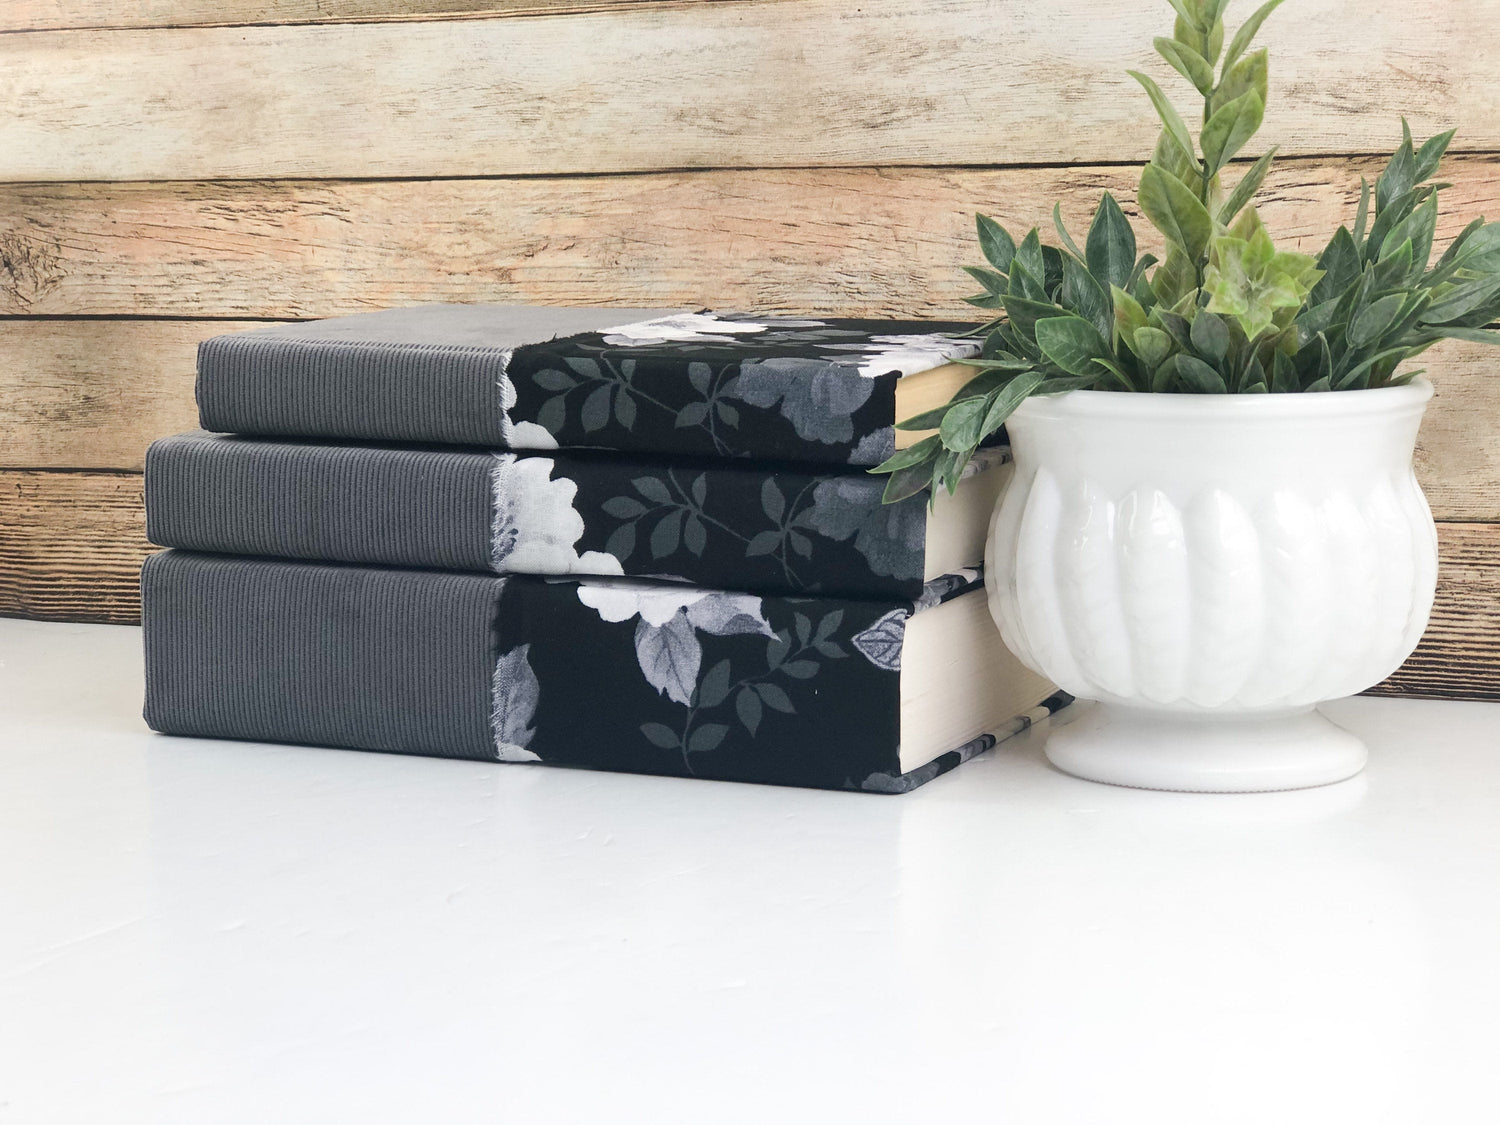 Gray and Black Fabric Covered Books